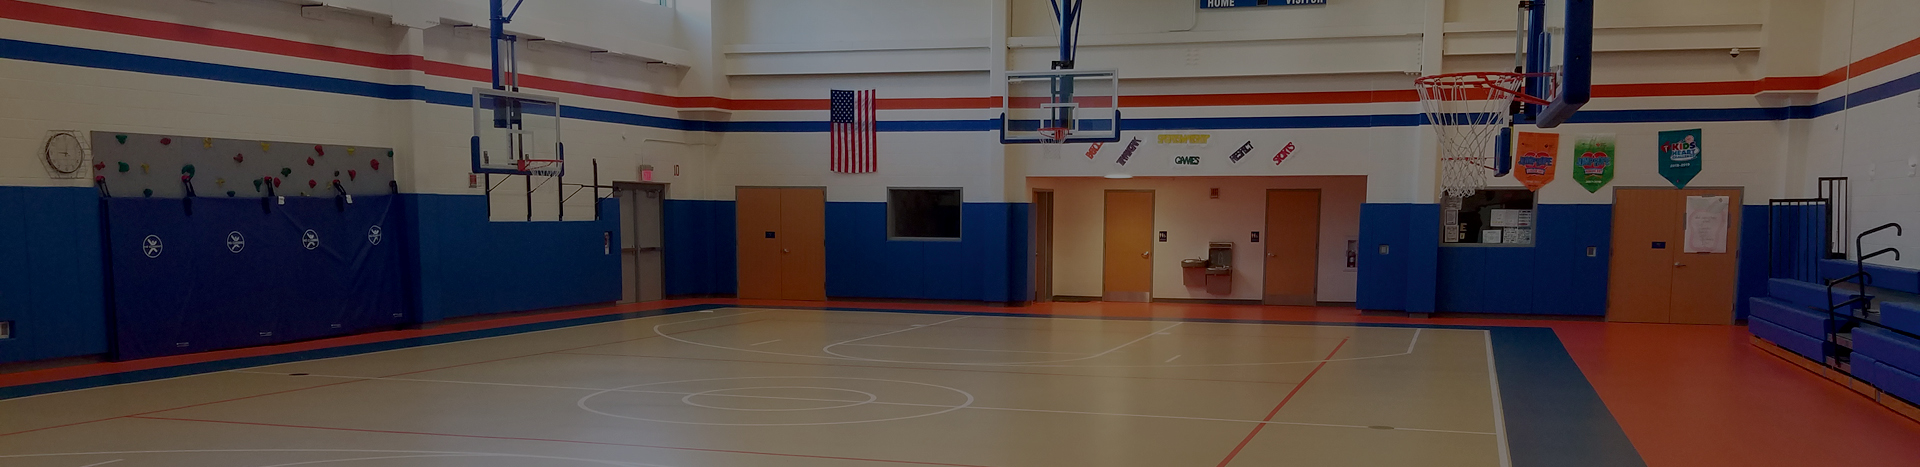 Gymnasium with multi-colored floor and blue, padded walls.